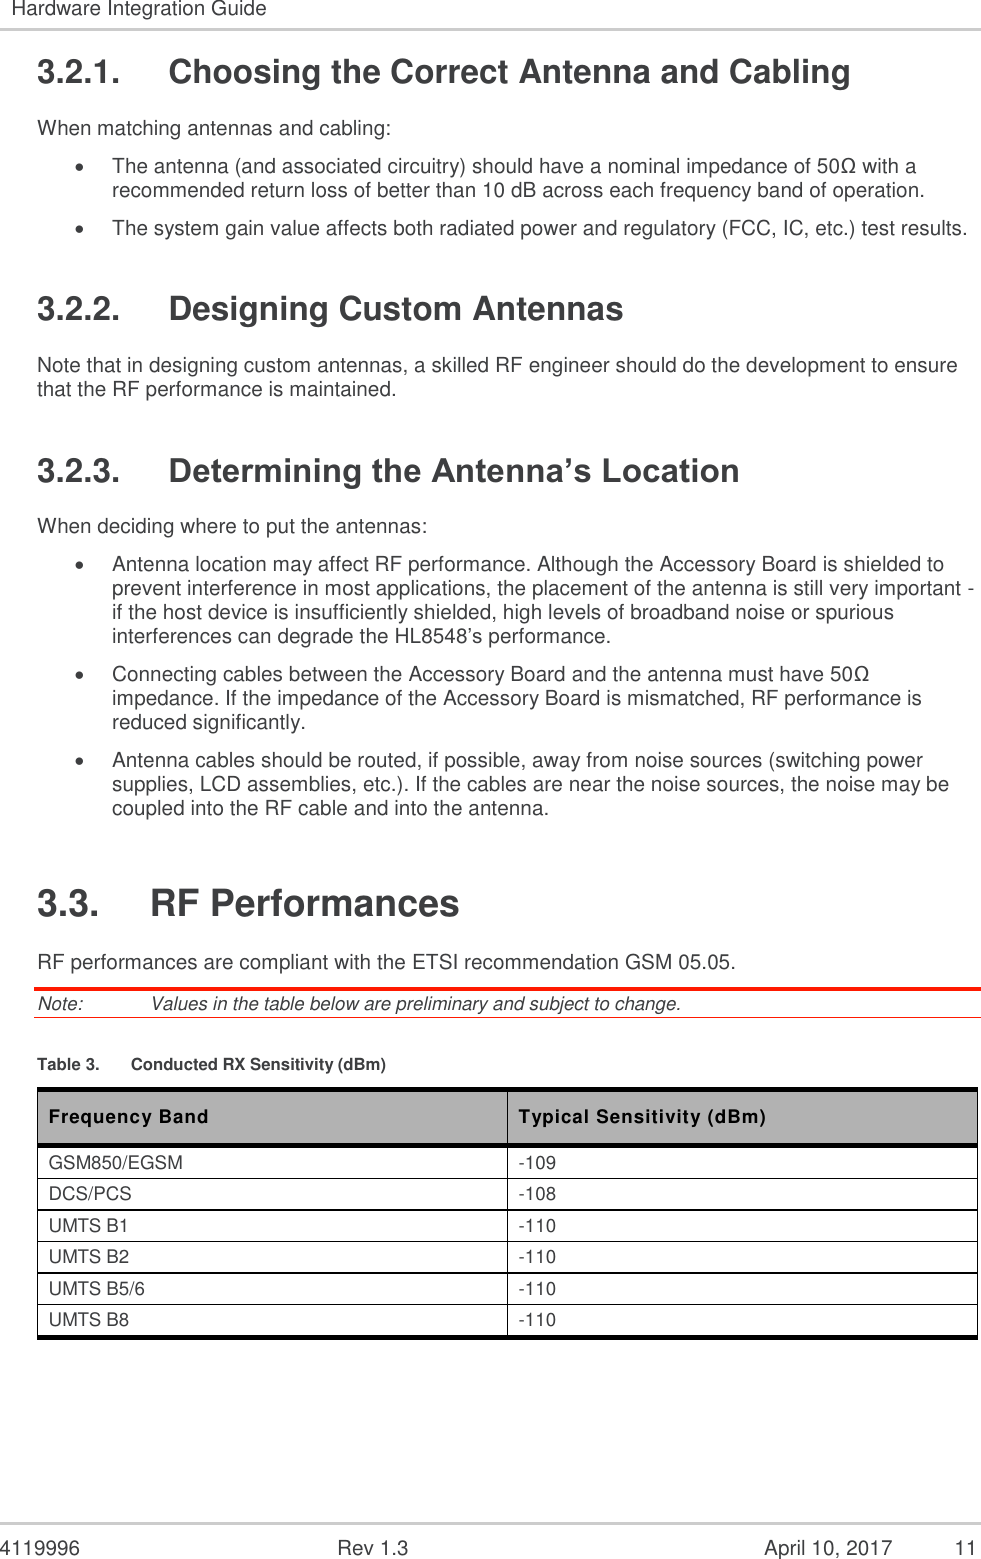  4119996  Rev 1.3    11 Hardware Integration Guide   3.2.1.  Choosing the Correct Antenna and Cabling When matching antennas and cabling:  The antenna (and associated circuitry) should have a nominal impedance of 50Ω with a recommended return loss of better than 10 dB across each frequency band of operation.  The system gain value affects both radiated power and regulatory (FCC, IC, etc.) test results. 3.2.2.  Designing Custom Antennas Note that in designing custom antennas, a skilled RF engineer should do the development to ensure that the RF performance is maintained. 3.2.3. Determining the Antenna’s Location When deciding where to put the antennas:  Antenna location may affect RF performance. Although the Accessory Board is shielded to prevent interference in most applications, the placement of the antenna is still very important - if the host device is insufficiently shielded, high levels of broadband noise or spurious interferences can degrade the HL8548’s performance.  Connecting cables between the Accessory Board and the antenna must have 50Ω impedance. If the impedance of the Accessory Board is mismatched, RF performance is reduced significantly.  Antenna cables should be routed, if possible, away from noise sources (switching power supplies, LCD assemblies, etc.). If the cables are near the noise sources, the noise may be coupled into the RF cable and into the antenna. 3.3.  RF Performances RF performances are compliant with the ETSI recommendation GSM 05.05. Note:   Values in the table below are preliminary and subject to change. Table 3.  Conducted RX Sensitivity (dBm) Frequency Band  Typical Sensitivity (dBm) GSM850/EGSM -109 DCS/PCS -108 UMTS B1 -110 UMTS B2 -110 UMTS B5/6 -110 UMTS B8 -110  April 10, 2017